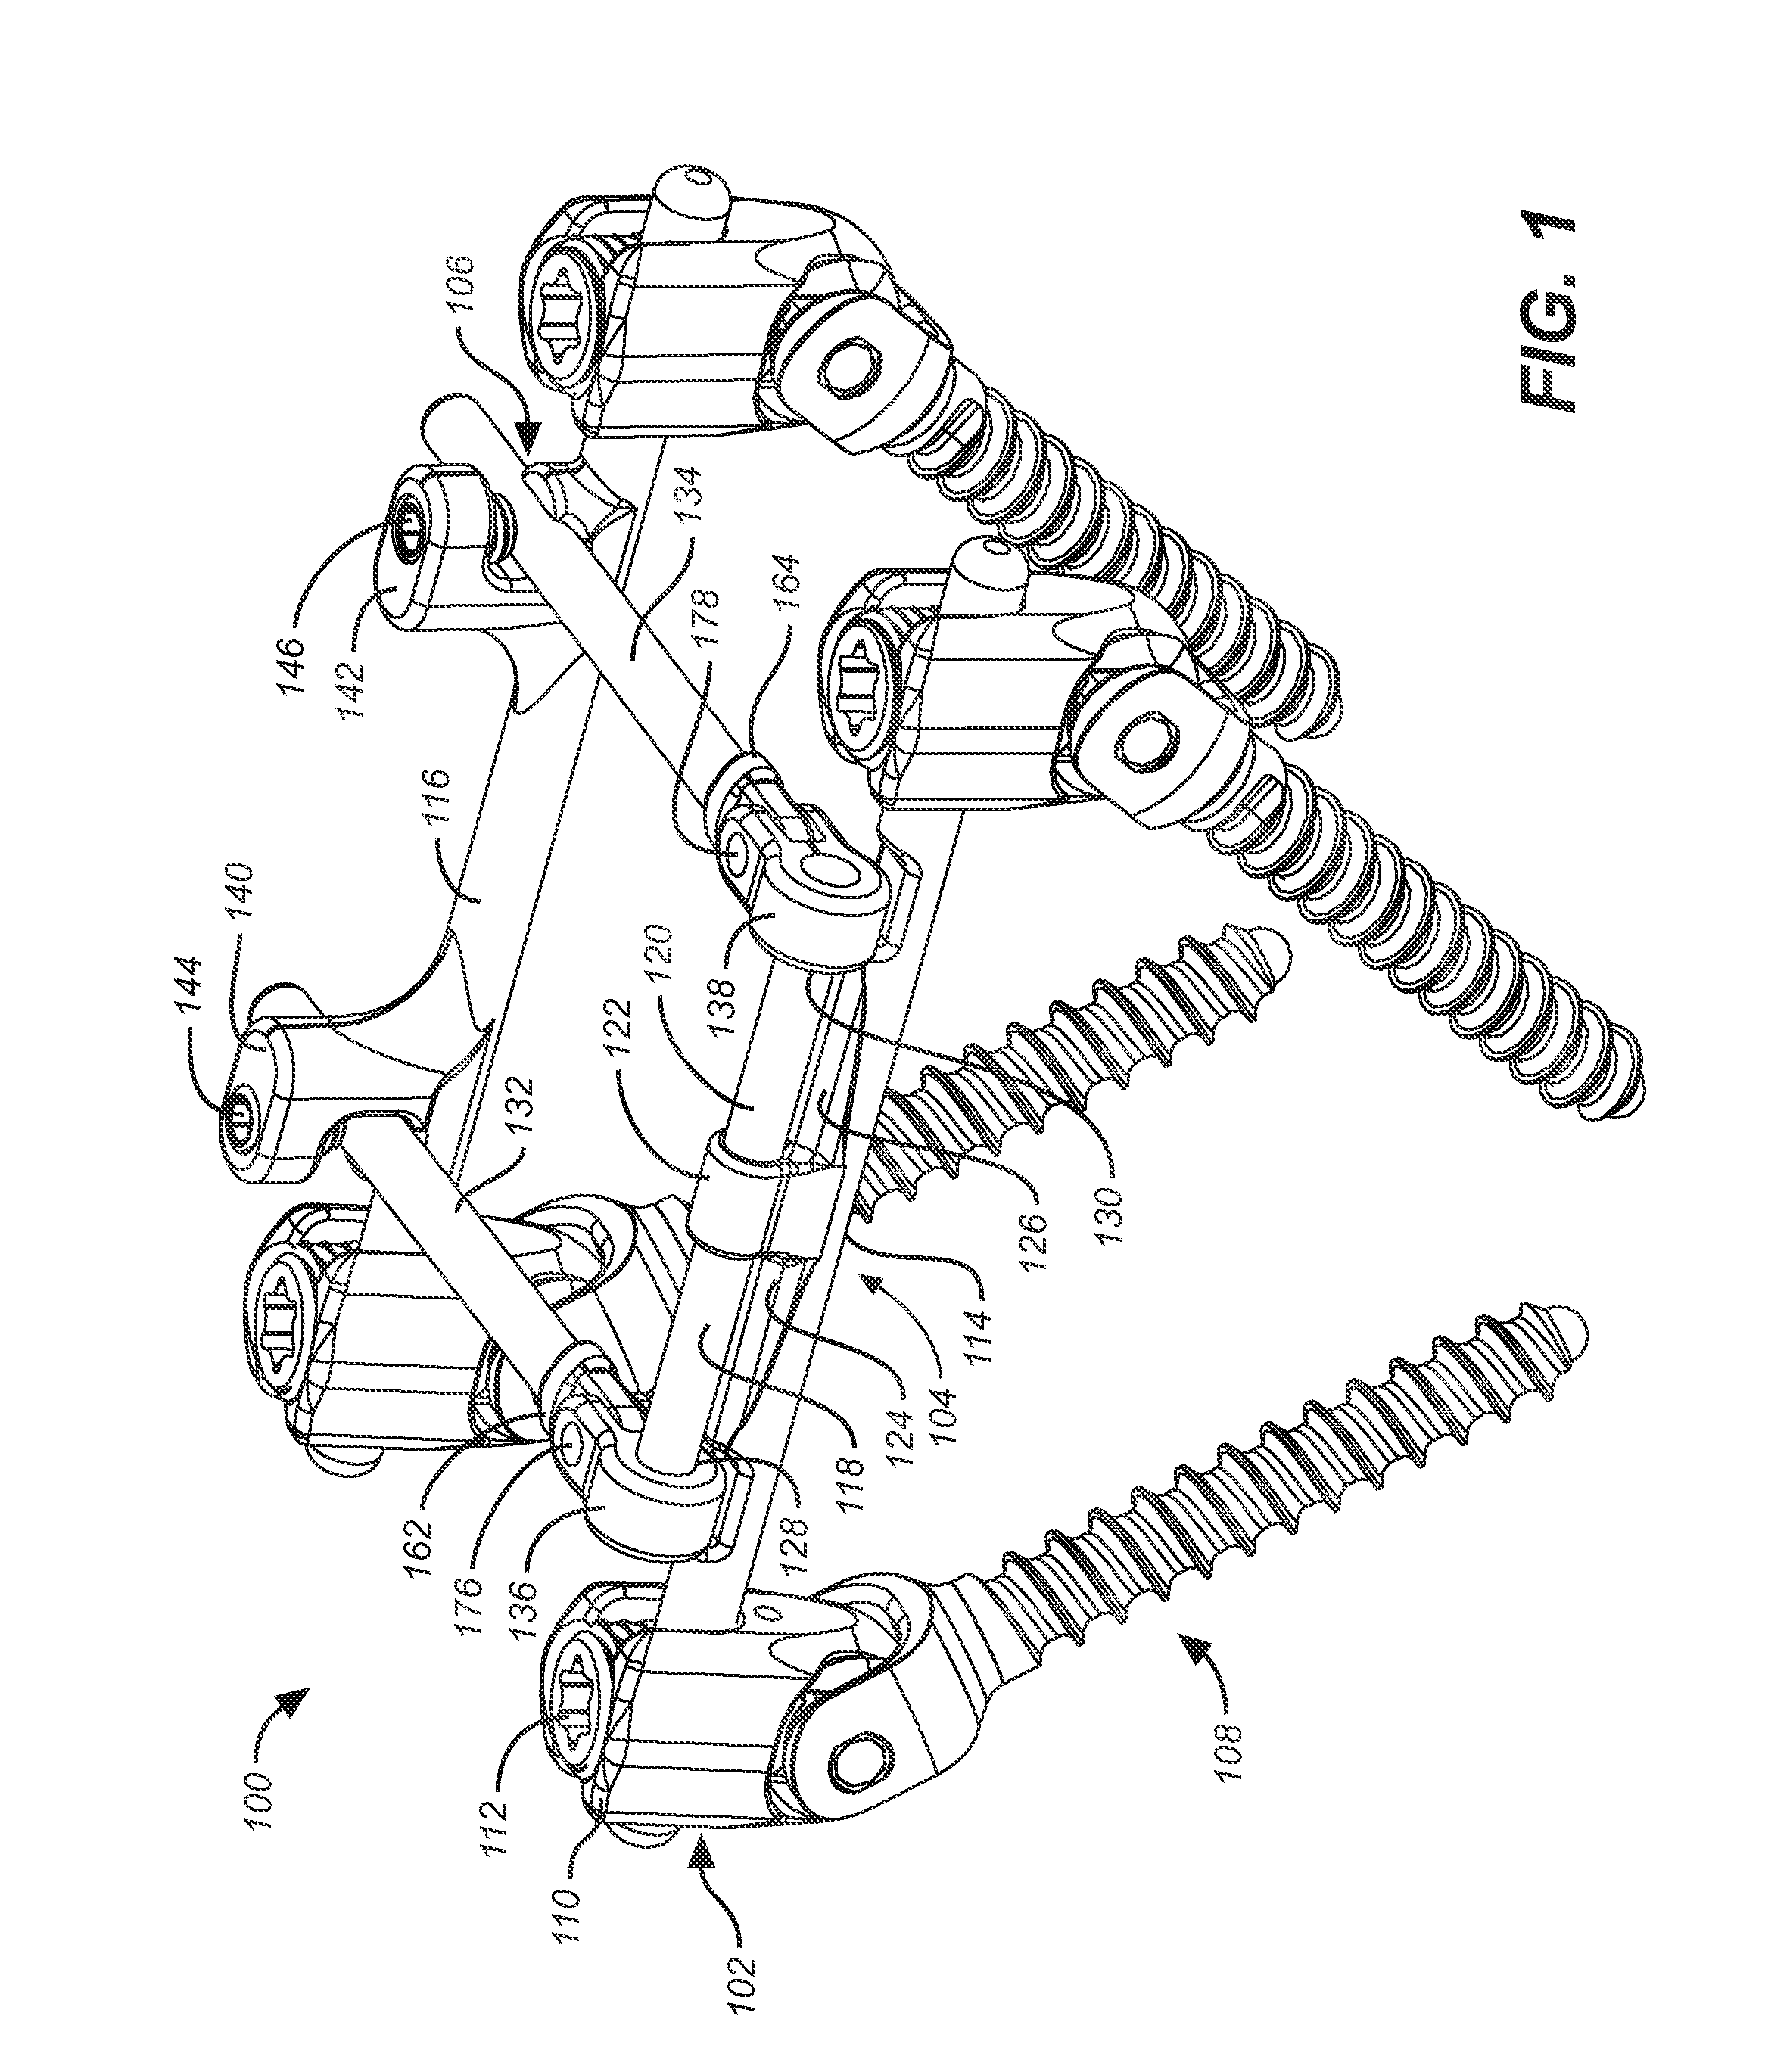 Rod capture mechanism for dynamic stabilization and motion preservation spinal implantation system and method